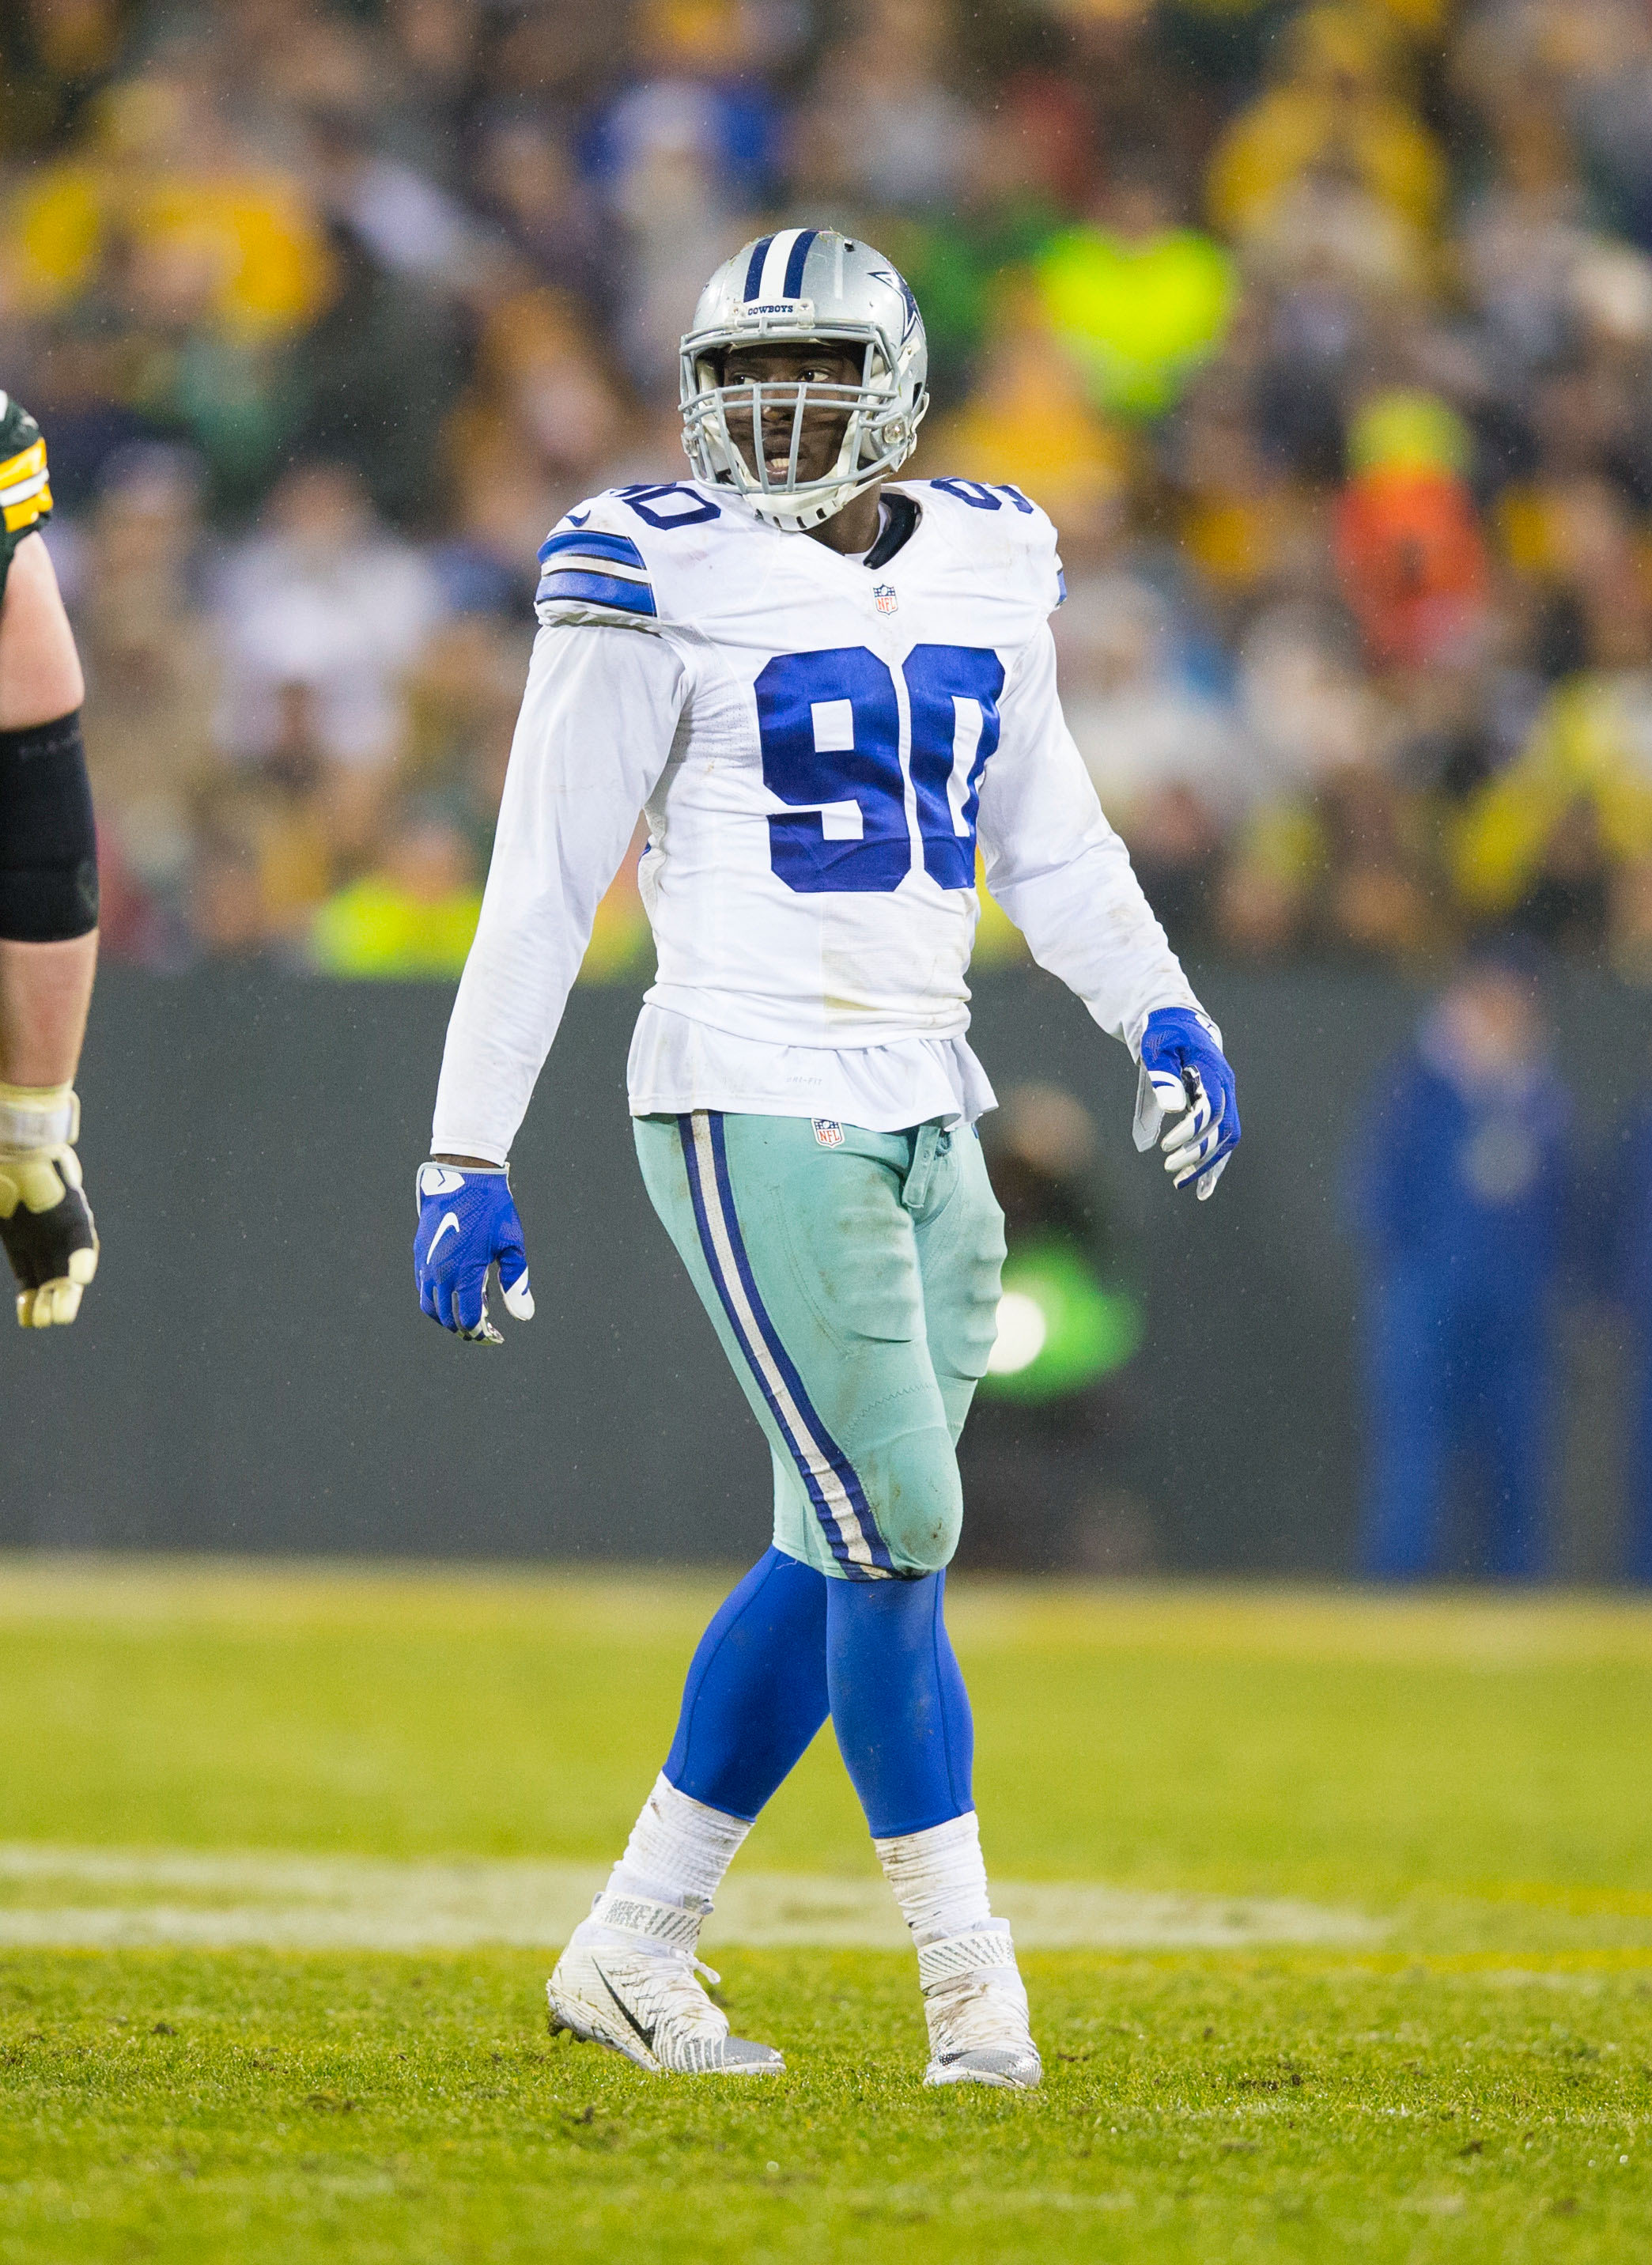 DeMarcus Lawrence (@TankLawrence) / X